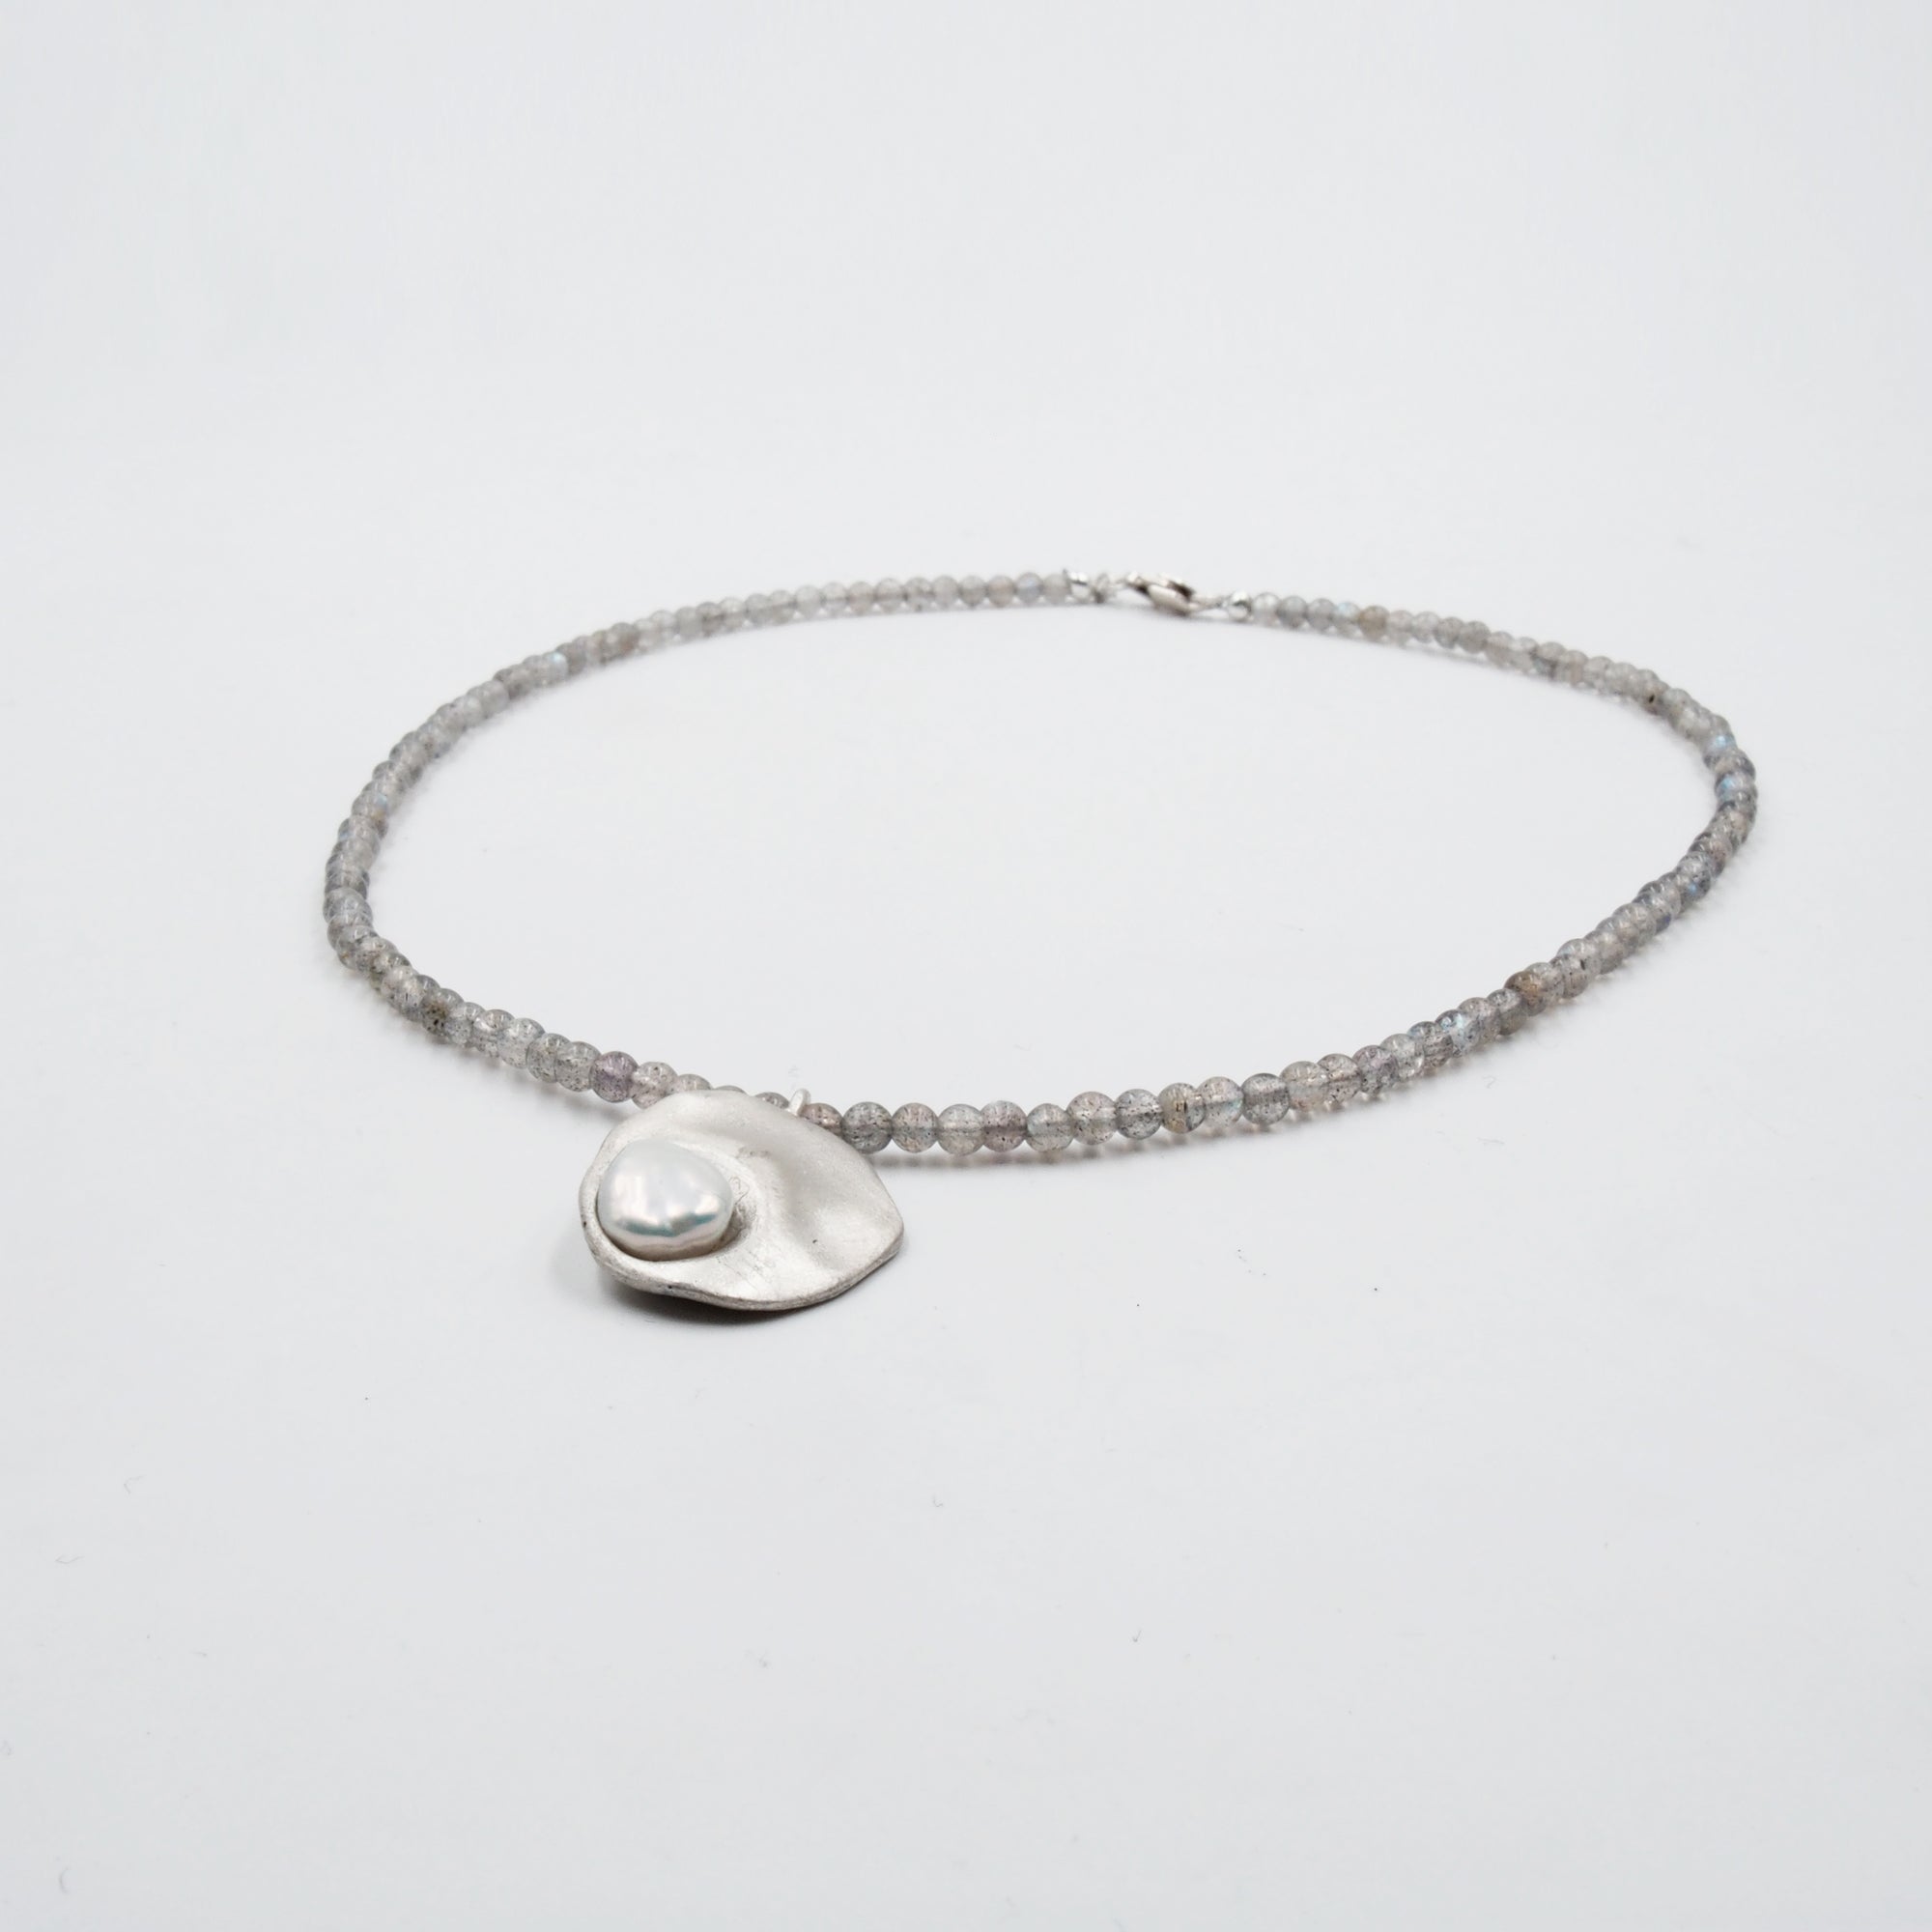 Pearl Bay Necklace